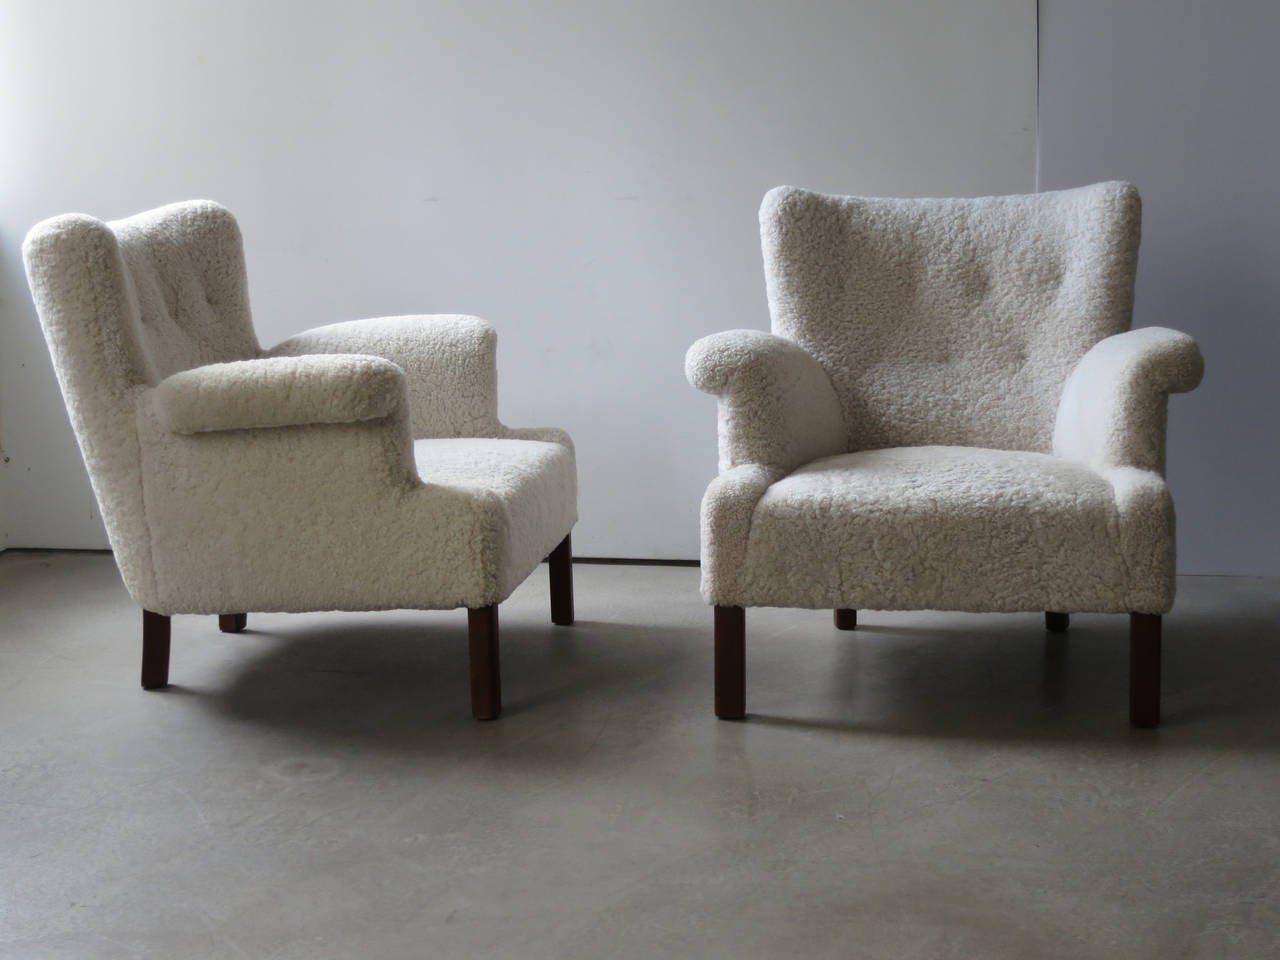 Mid-20th Century Pair of Elegant and Refined Sheepskin Lounge Chairs by Orla Mølgaard-Nielsen